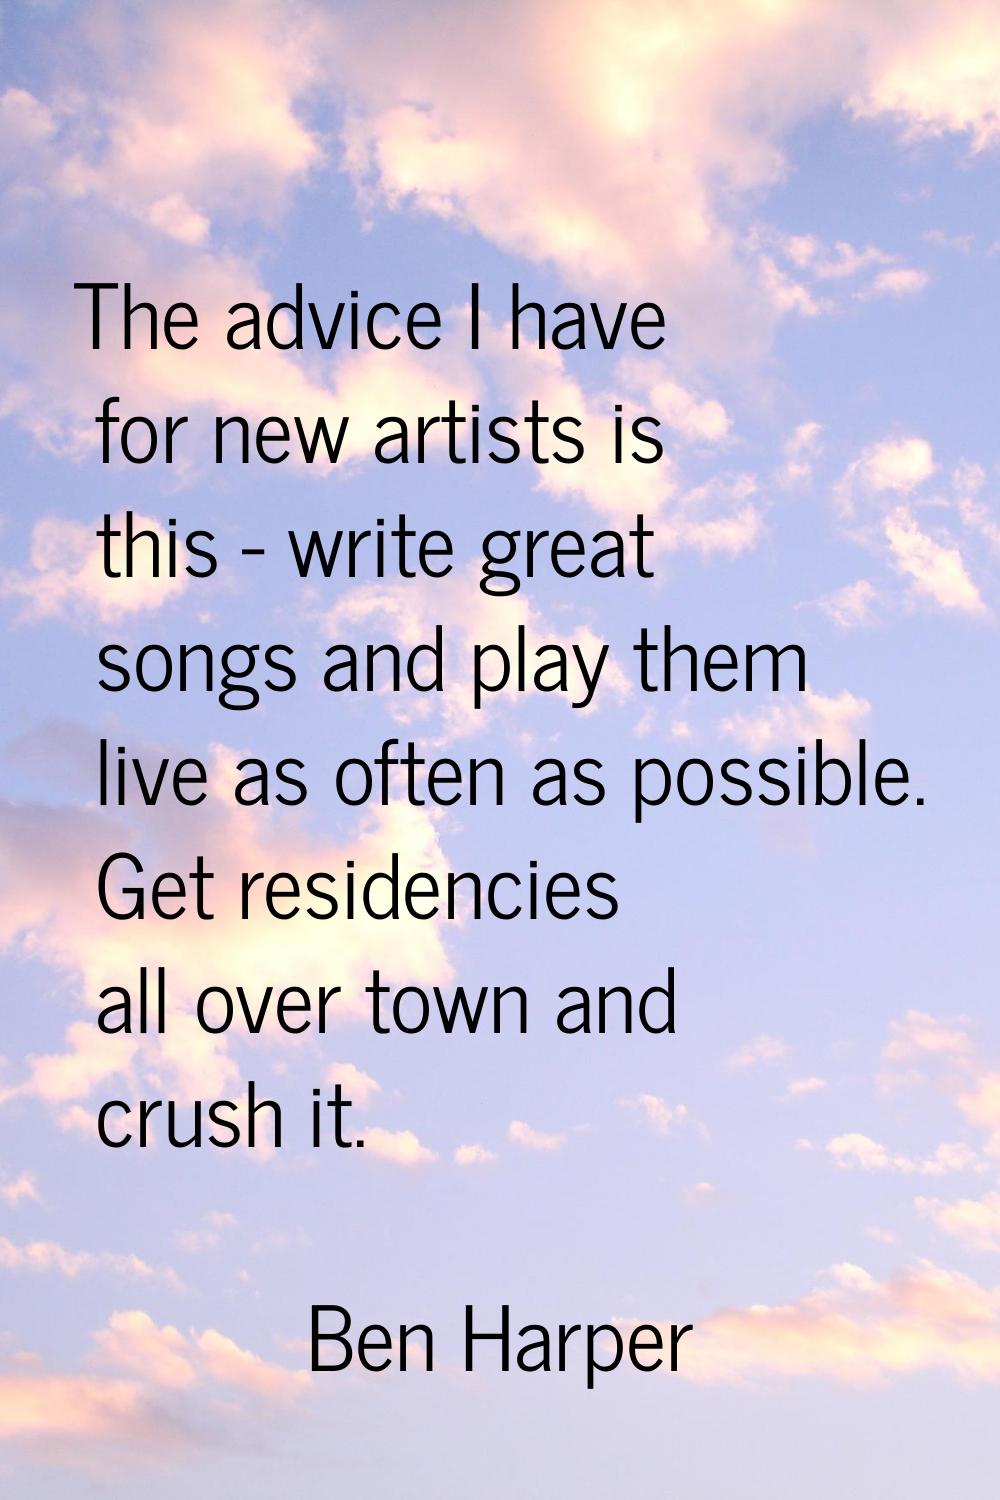 The advice I have for new artists is this - write great songs and play them live as often as possib